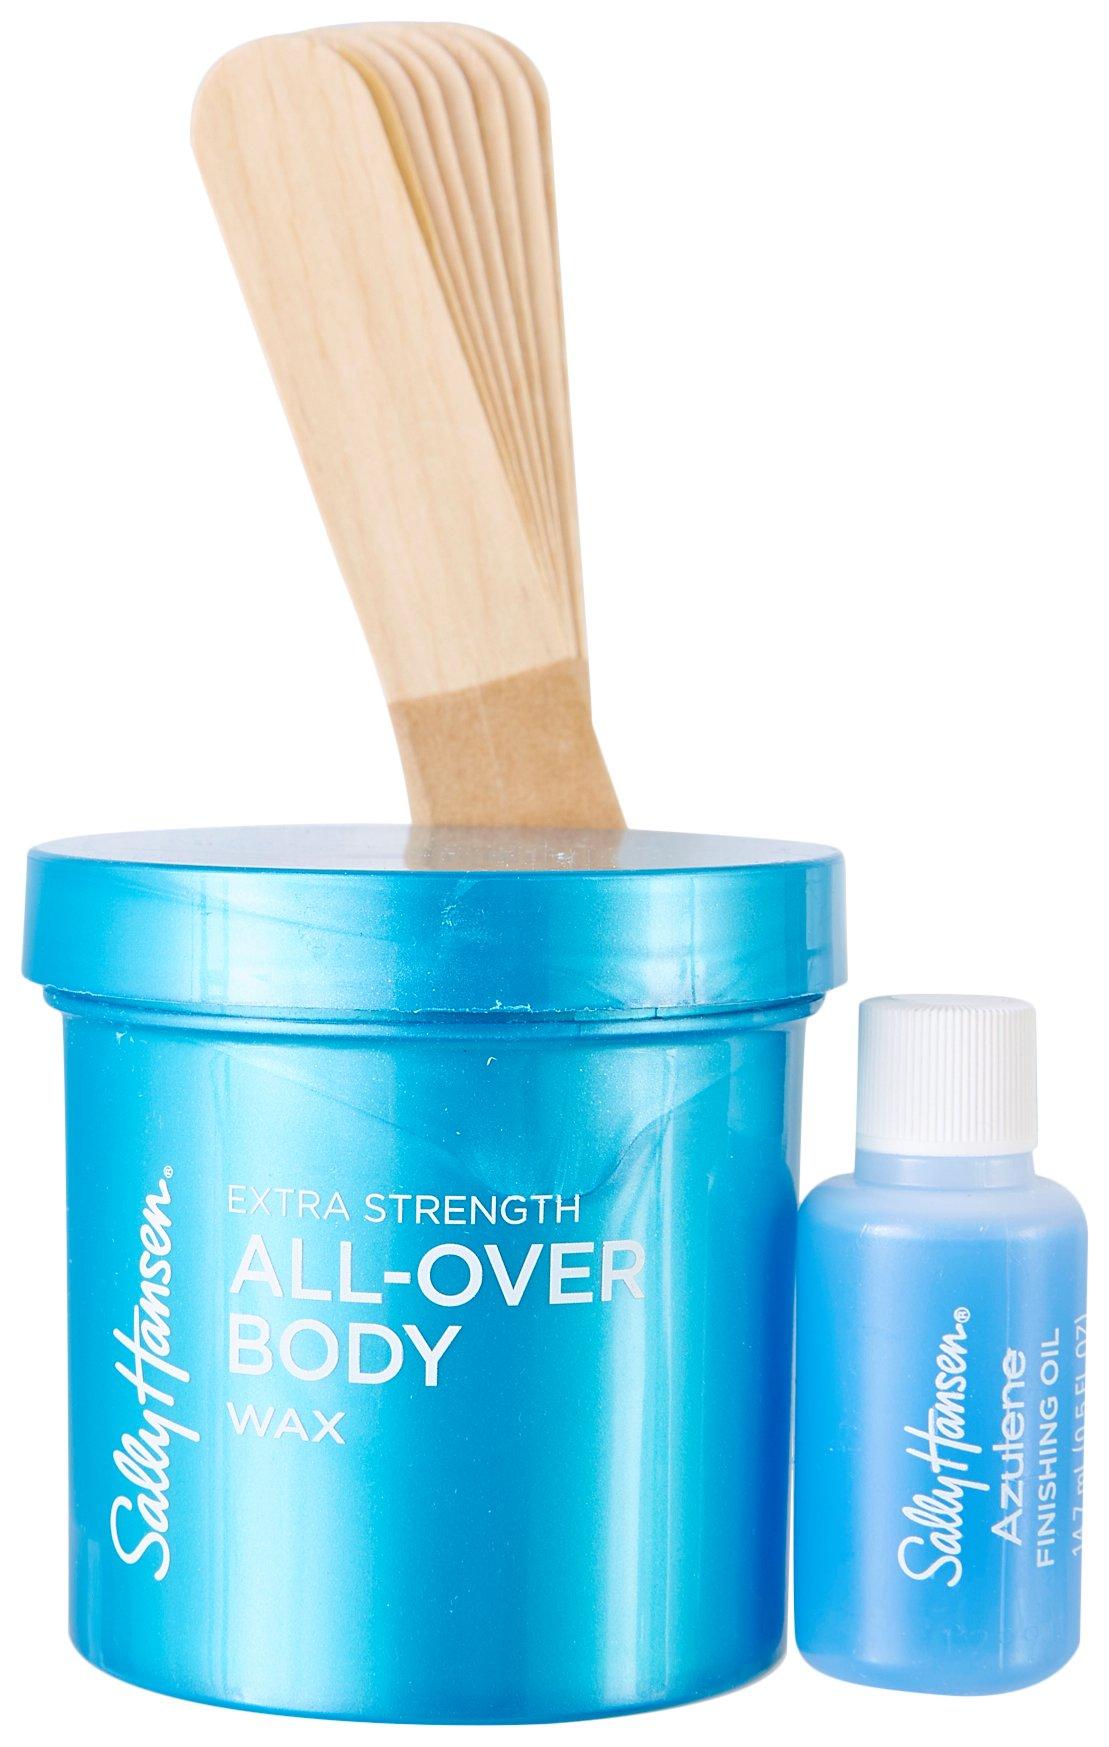 Extra Strength All-Over Body Wax Kit